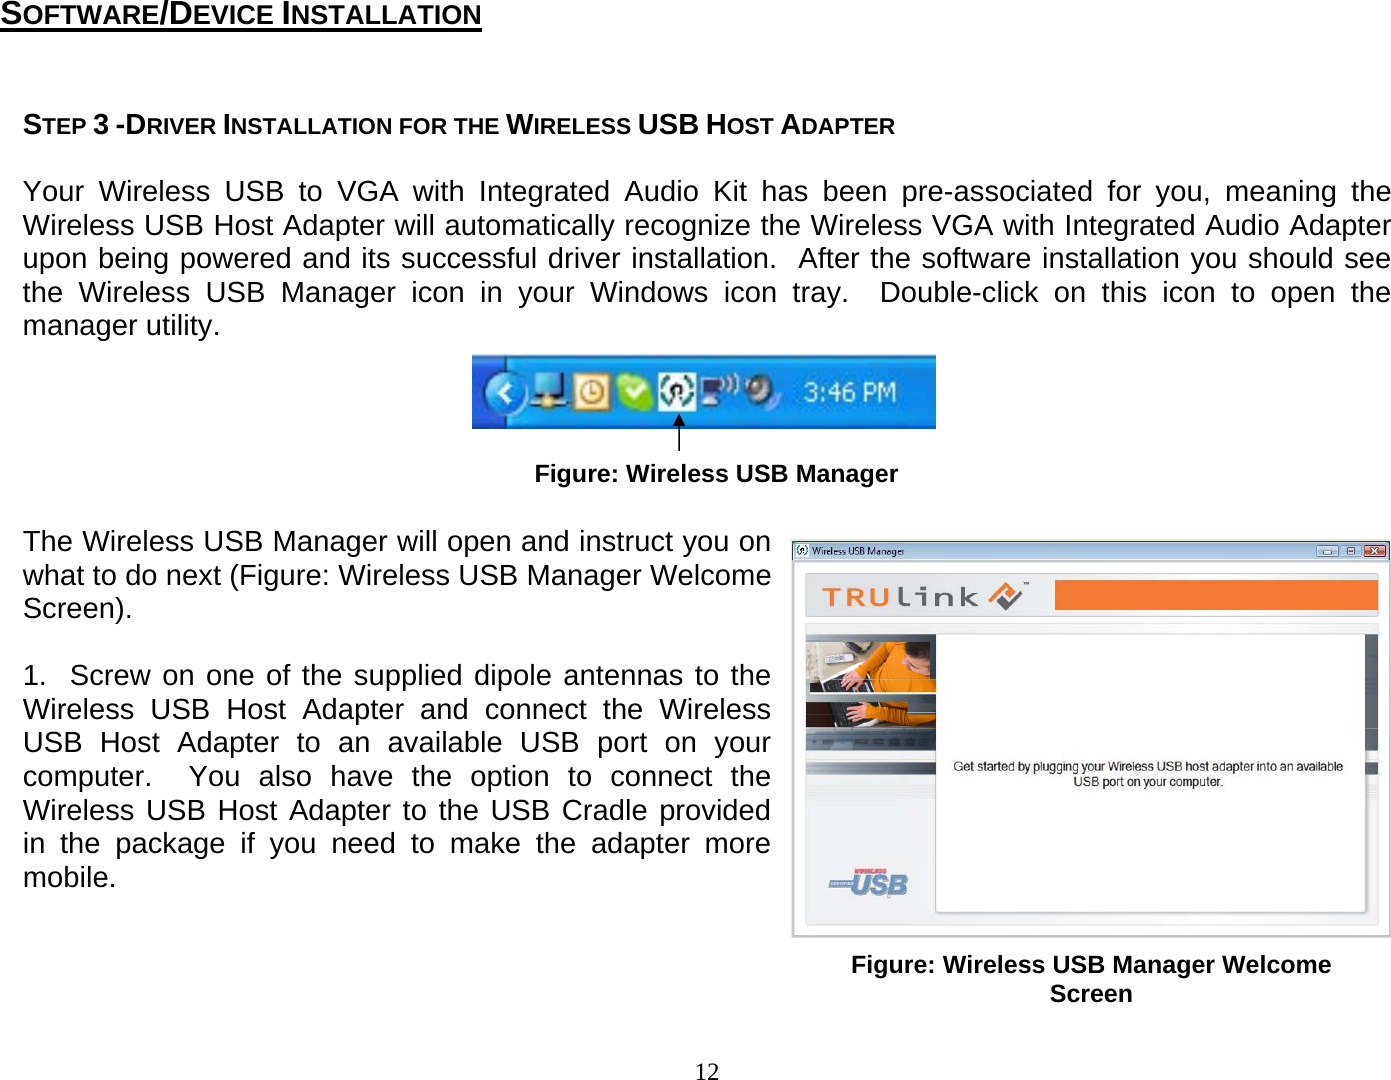 12  STEP 3 -DRIVER INSTALLATION FOR THE WIRELESS USB HOST ADAPTER   Your Wireless USB to VGA with Integrated Audio Kit has been pre-associated for you, meaning the Wireless USB Host Adapter will automatically recognize the Wireless VGA with Integrated Audio Adapter upon being powered and its successful driver installation.  After the software installation you should see the Wireless USB Manager icon in your Windows icon tray.  Double-click on this icon to open the manager utility.         The Wireless USB Manager will open and instruct you on what to do next (Figure: Wireless USB Manager Welcome Screen).    1.  Screw on one of the supplied dipole antennas to the Wireless USB Host Adapter and connect the Wireless USB Host Adapter to an available USB port on your computer.  You also have the option to connect the Wireless USB Host Adapter to the USB Cradle provided in the package if you need to make the adapter more mobile.    Figure: Wireless USB Manager SOFTWARE/DEVICE INSTALLATION Figure: Wireless USB Manager Welcome Screen 